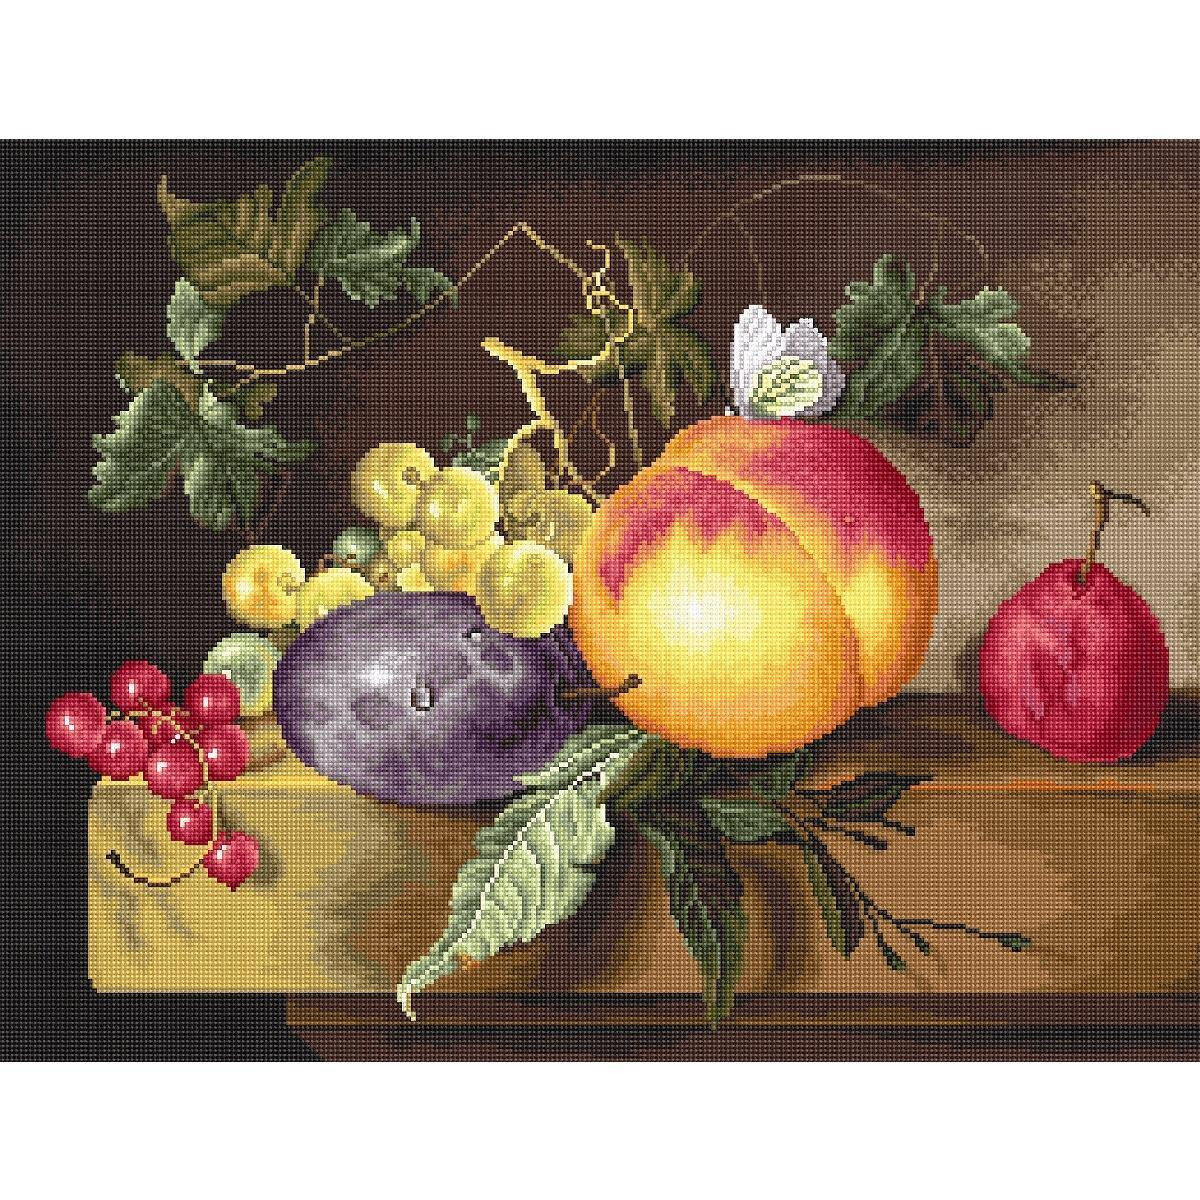 Luca-S counted Cross Stitch kit "Still Life...